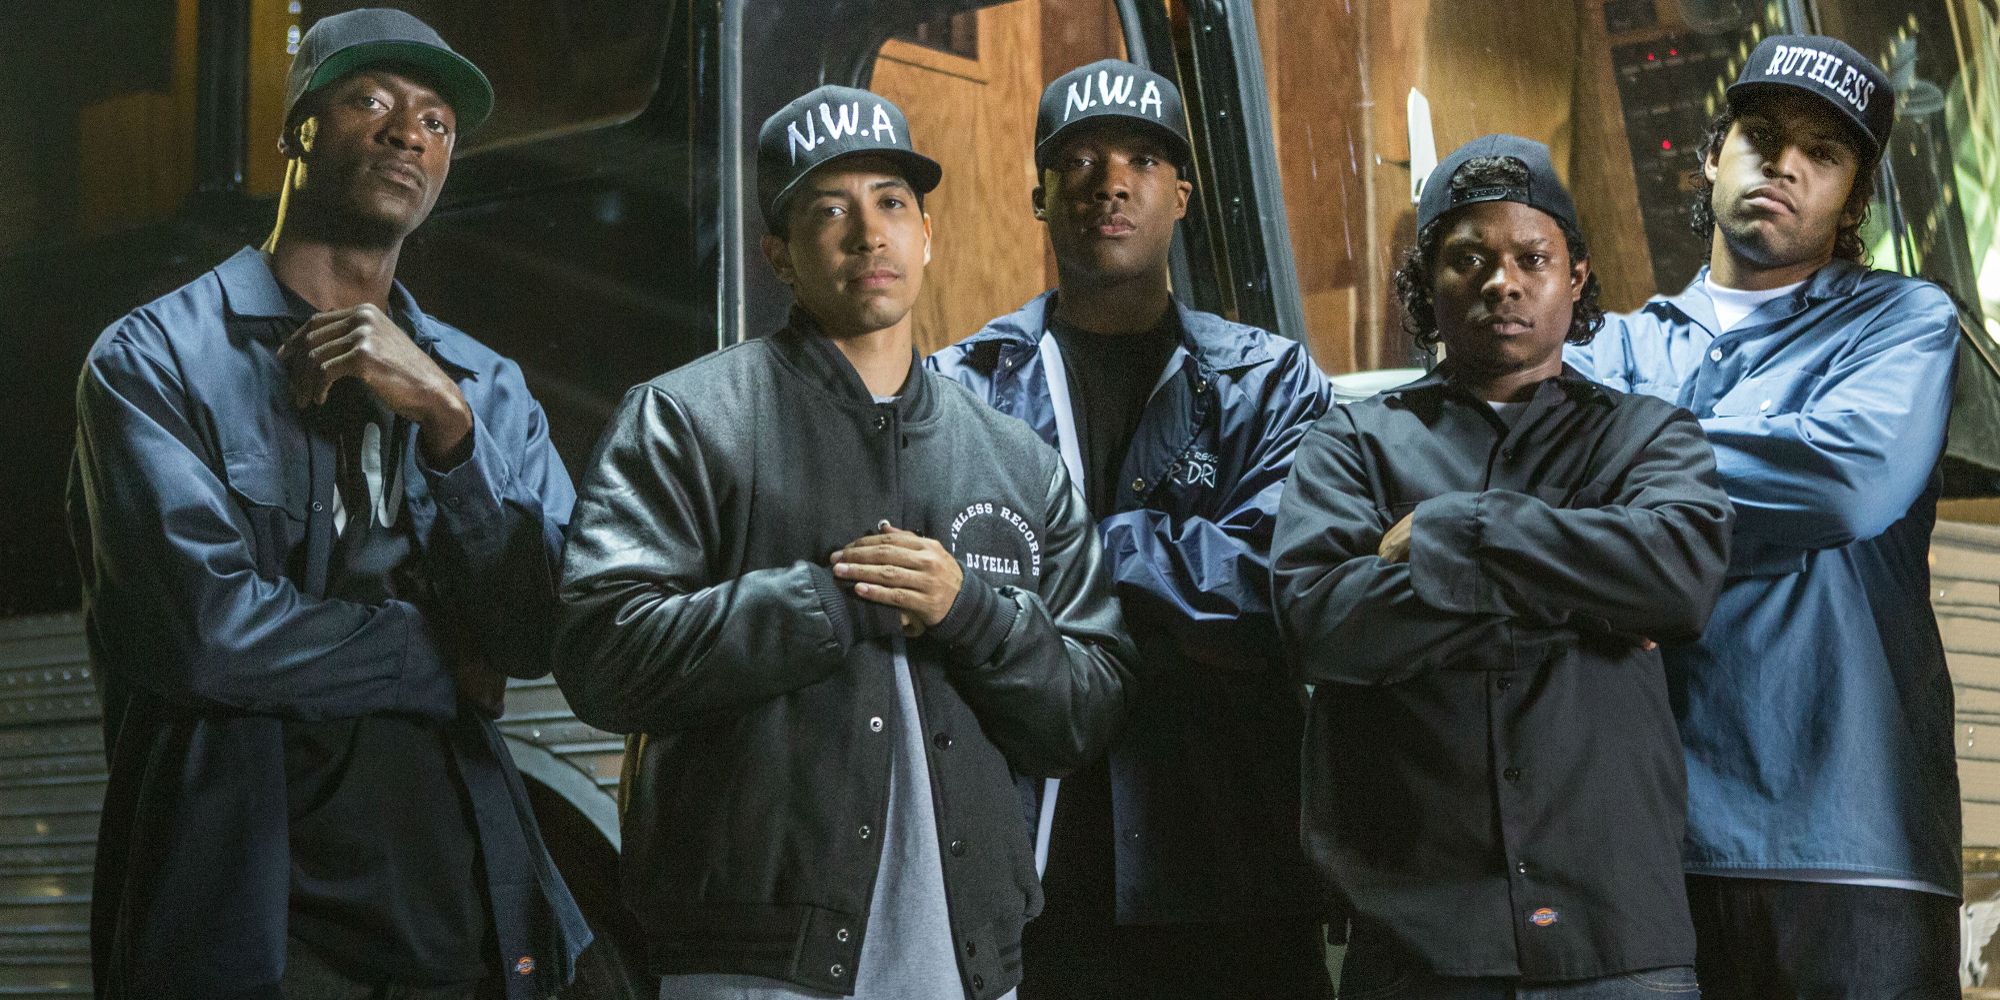 N.W.A. in 'Straight Outta Compton' in their jackets and caps